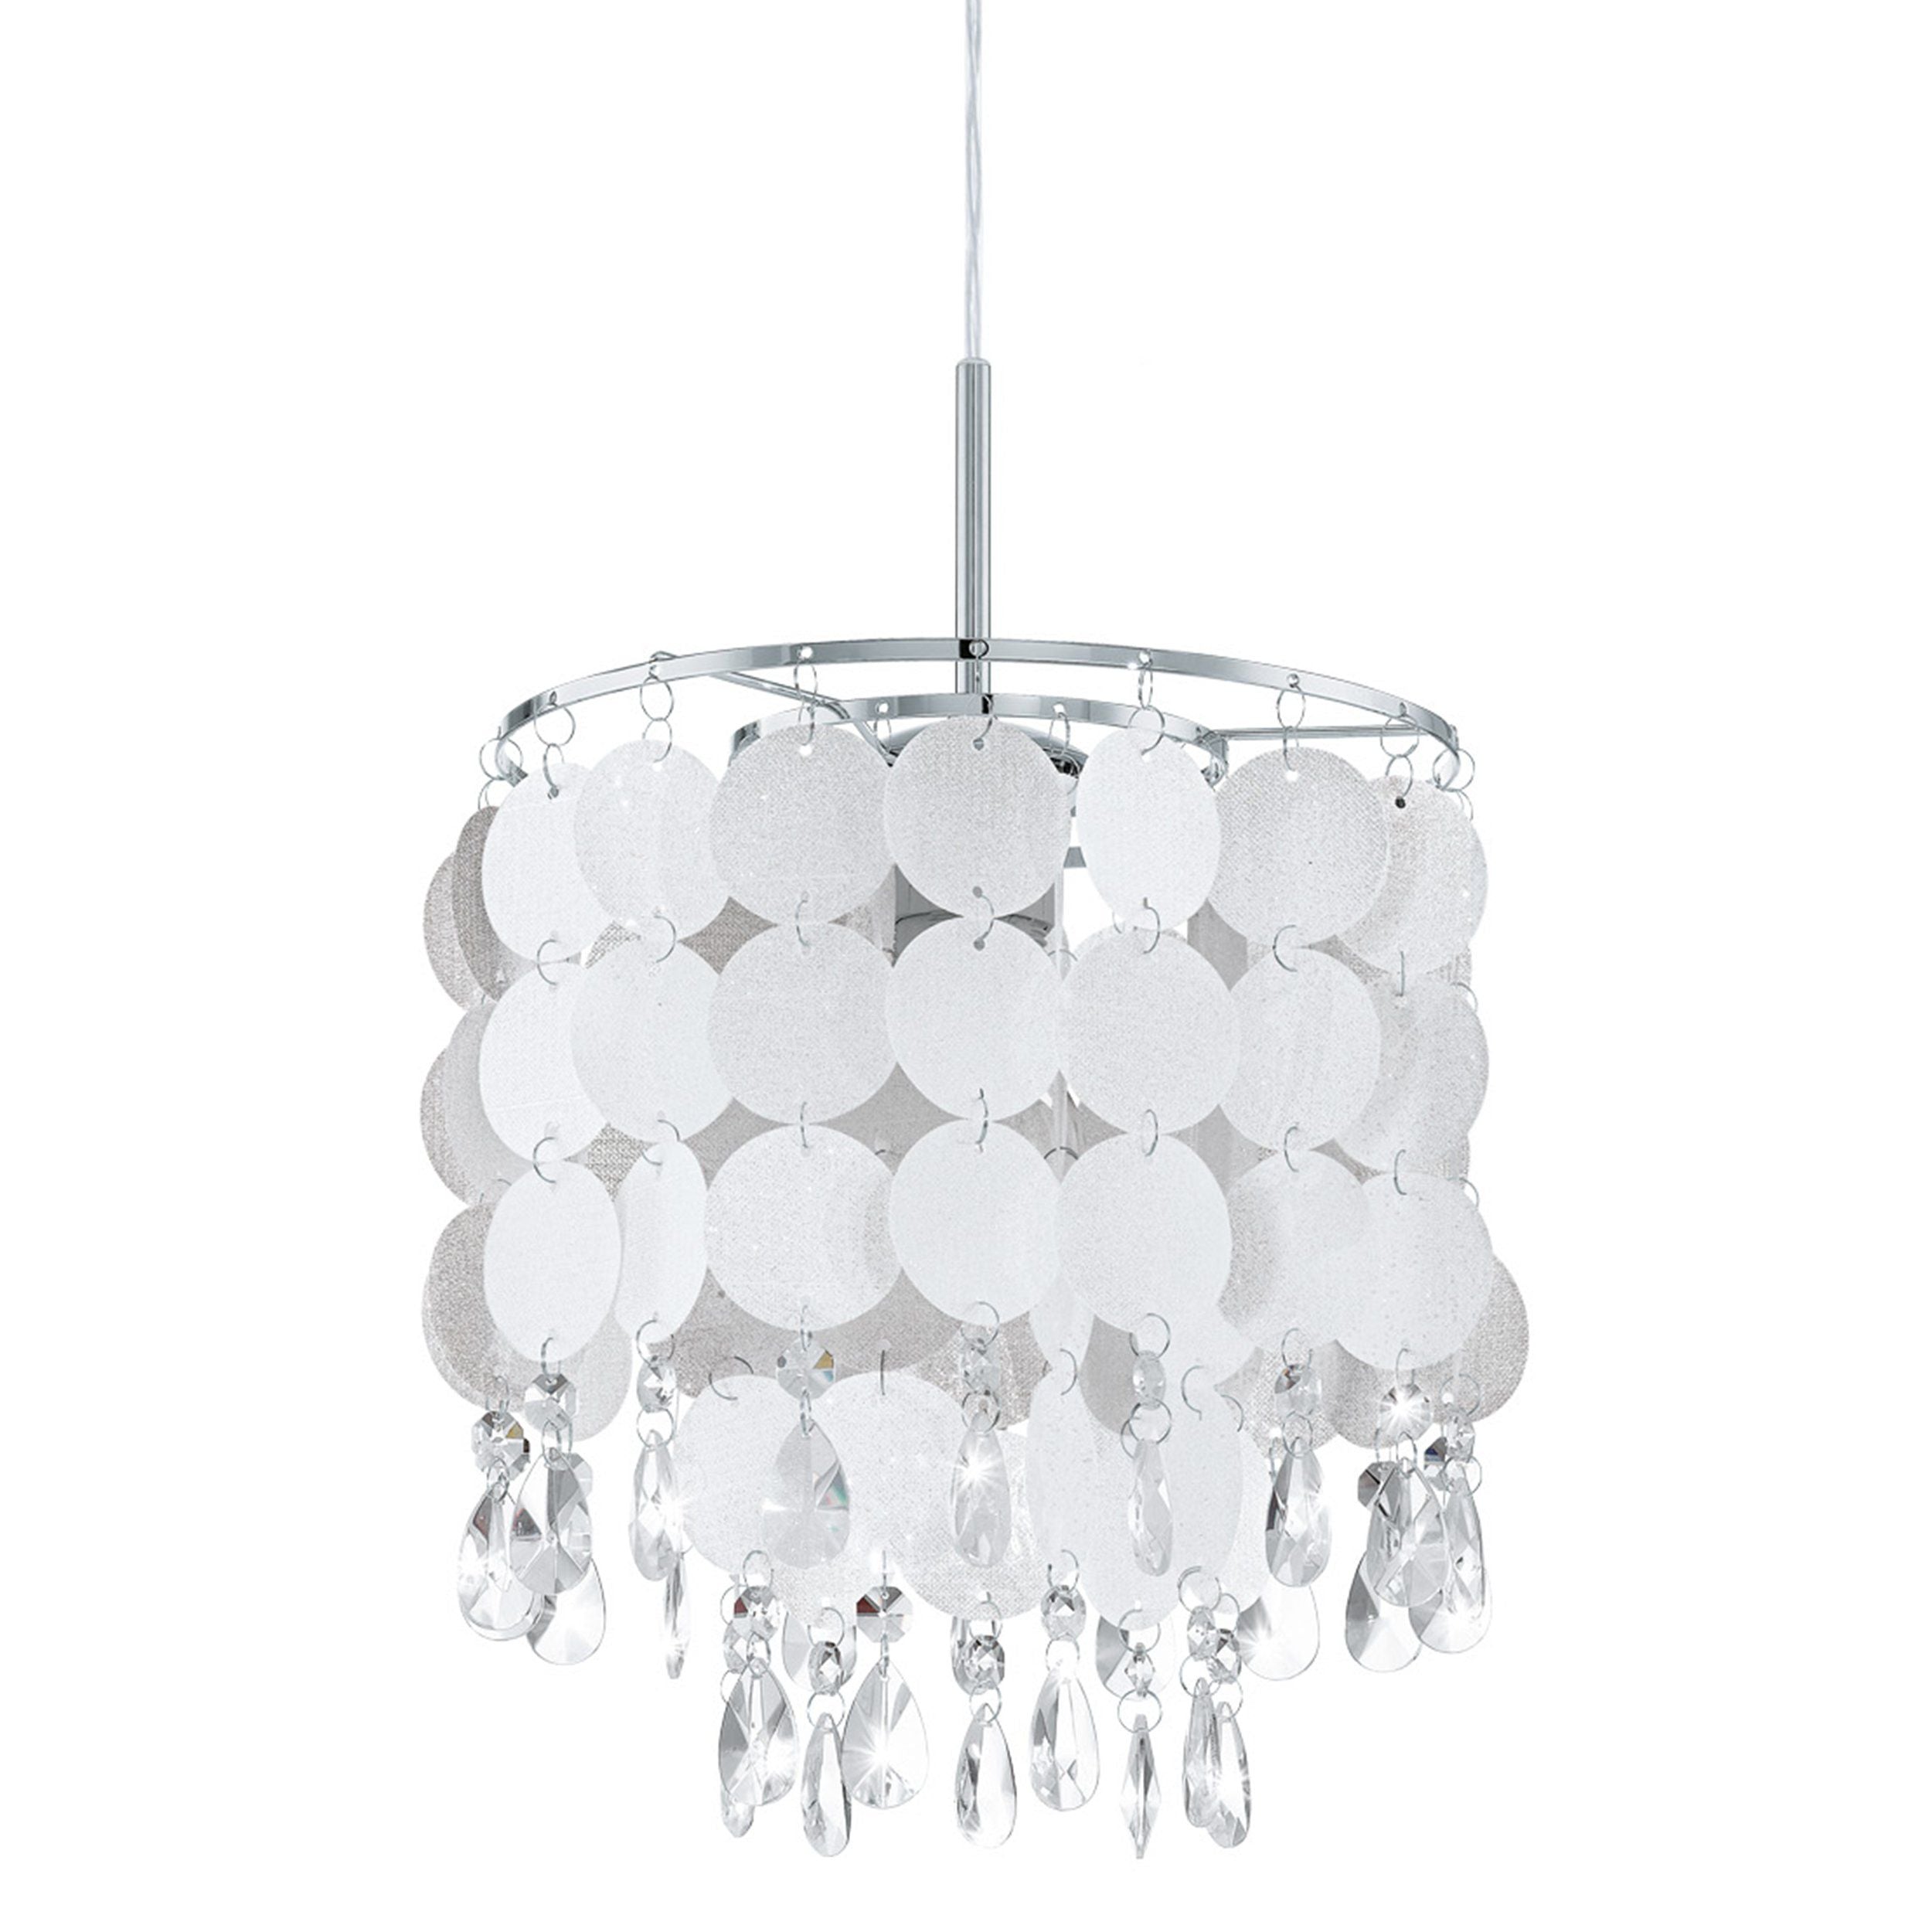 Giyani Chrome & Crystal Pendant Light (Launch Special) - Future Light - LED Lights South Africa